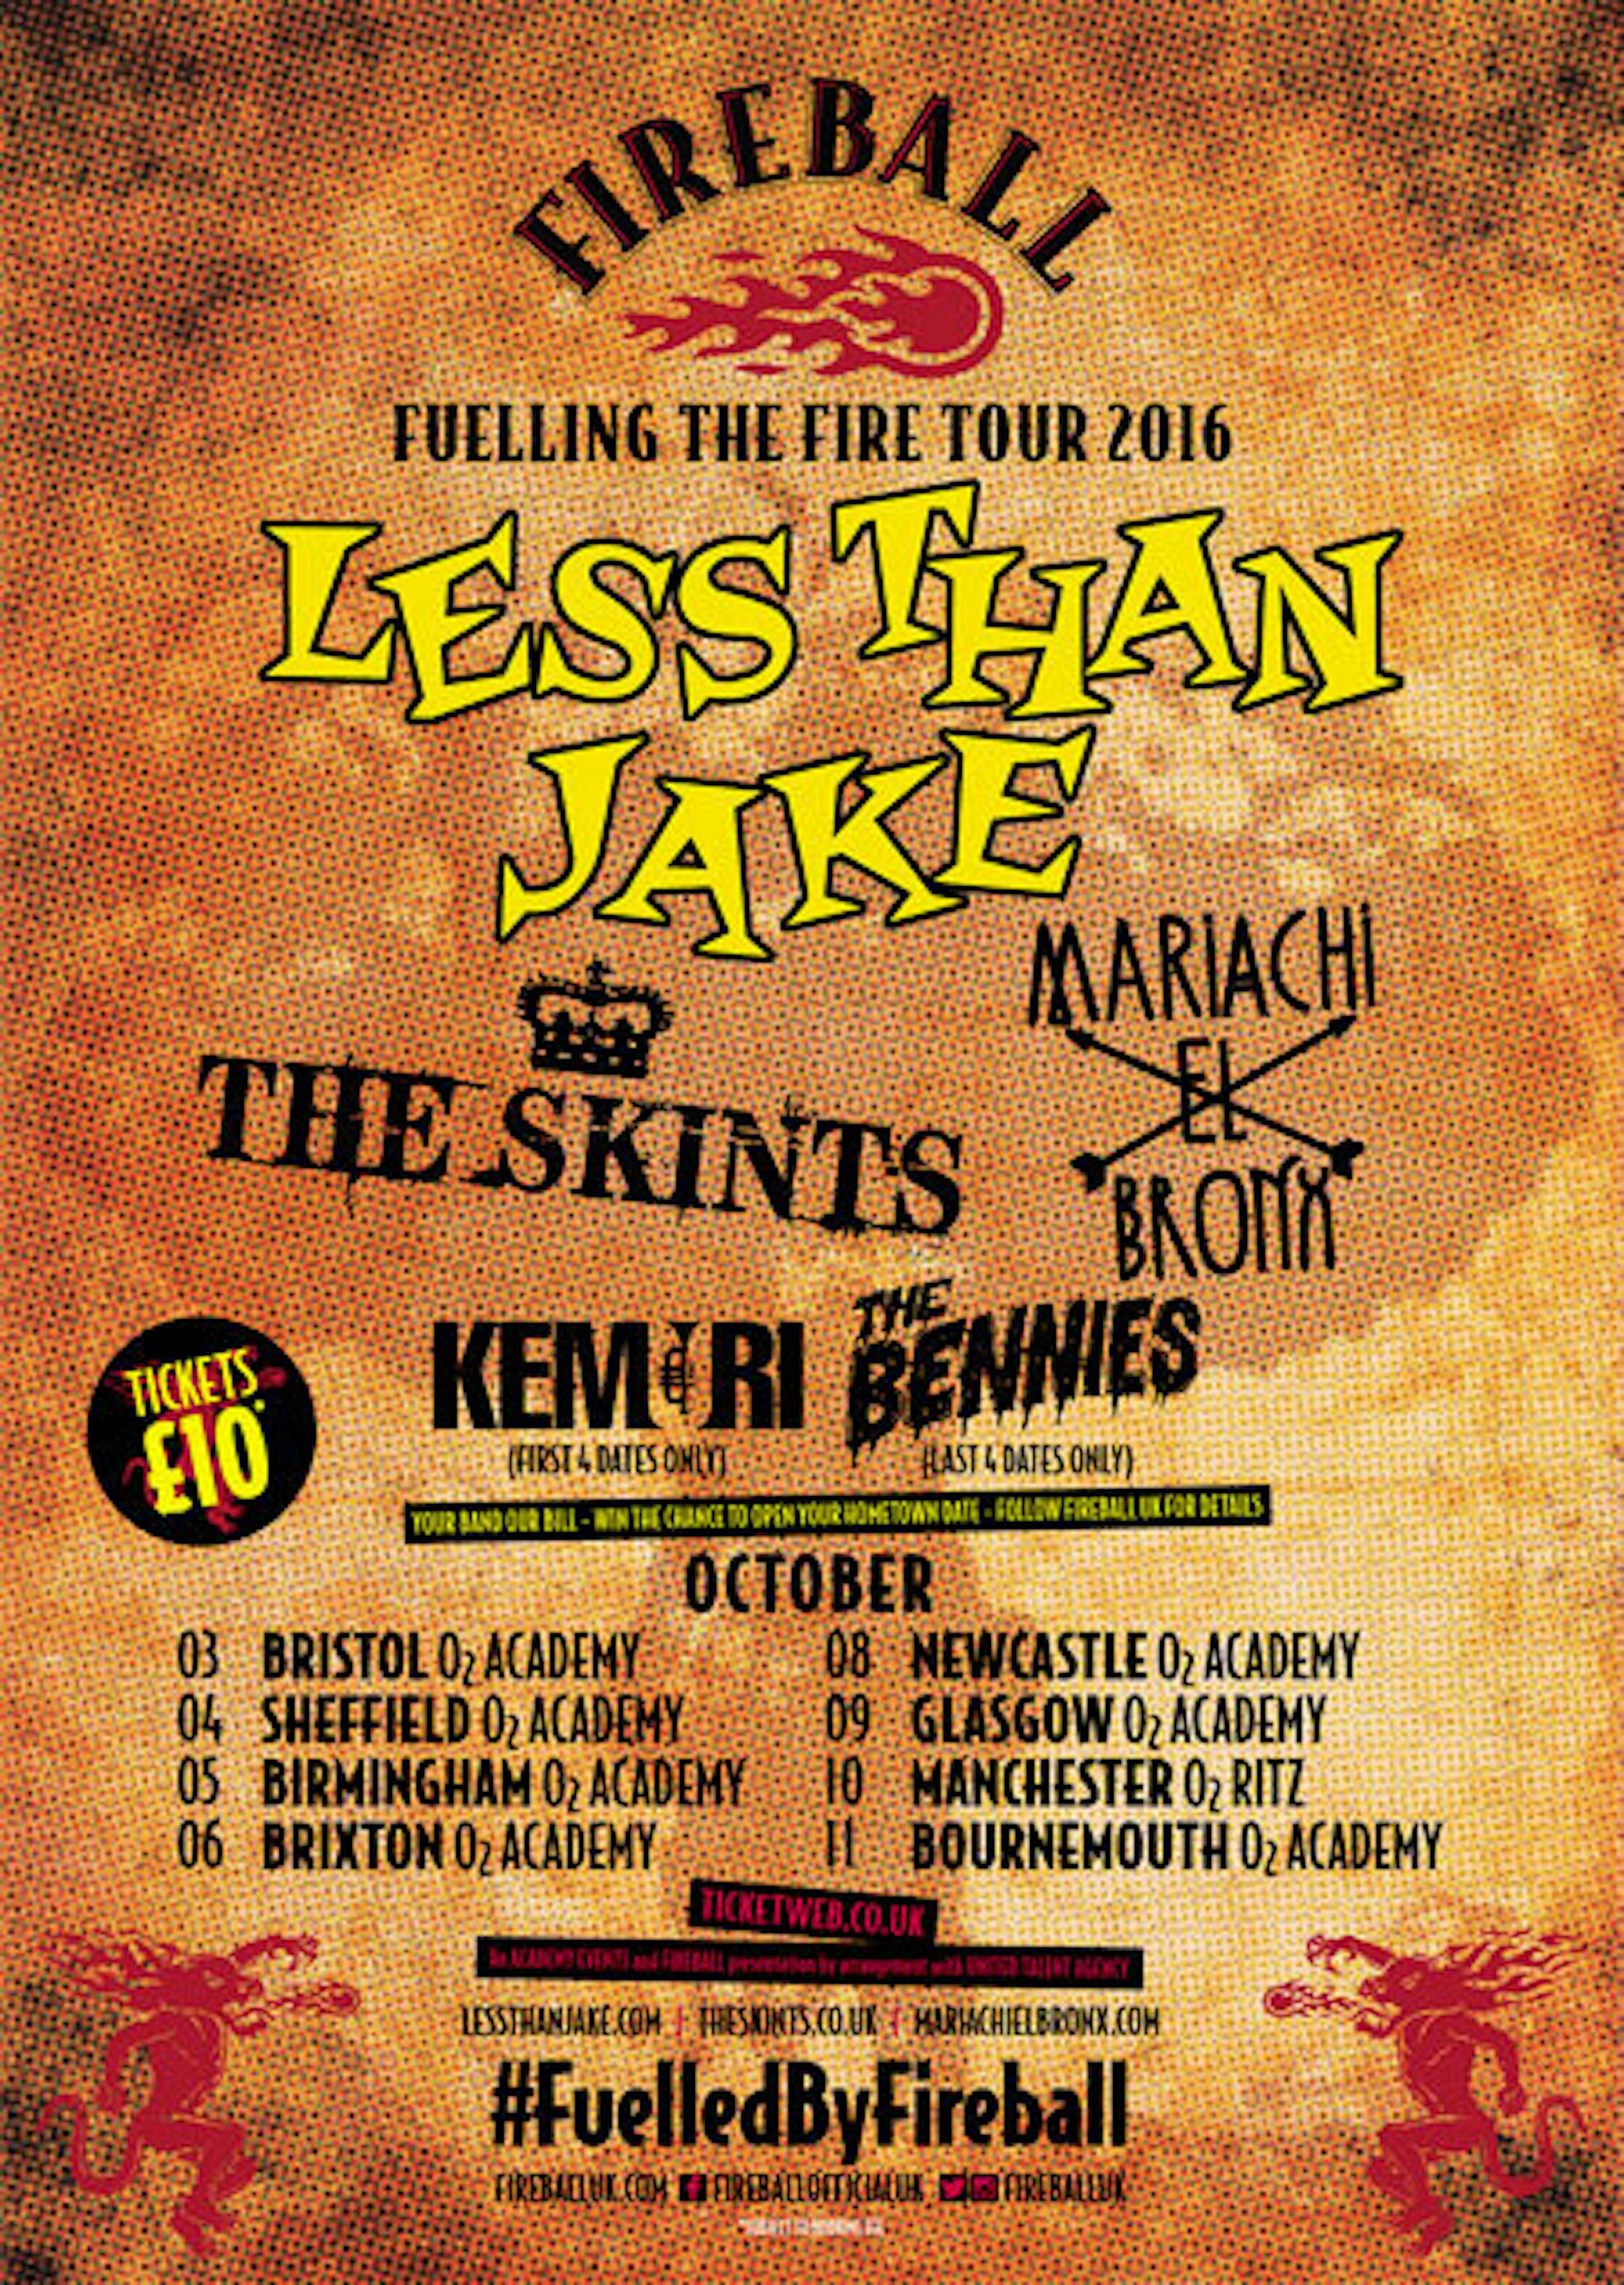 Less Than Jake And More Announced For Fireball: Fuelling The Fire Tour